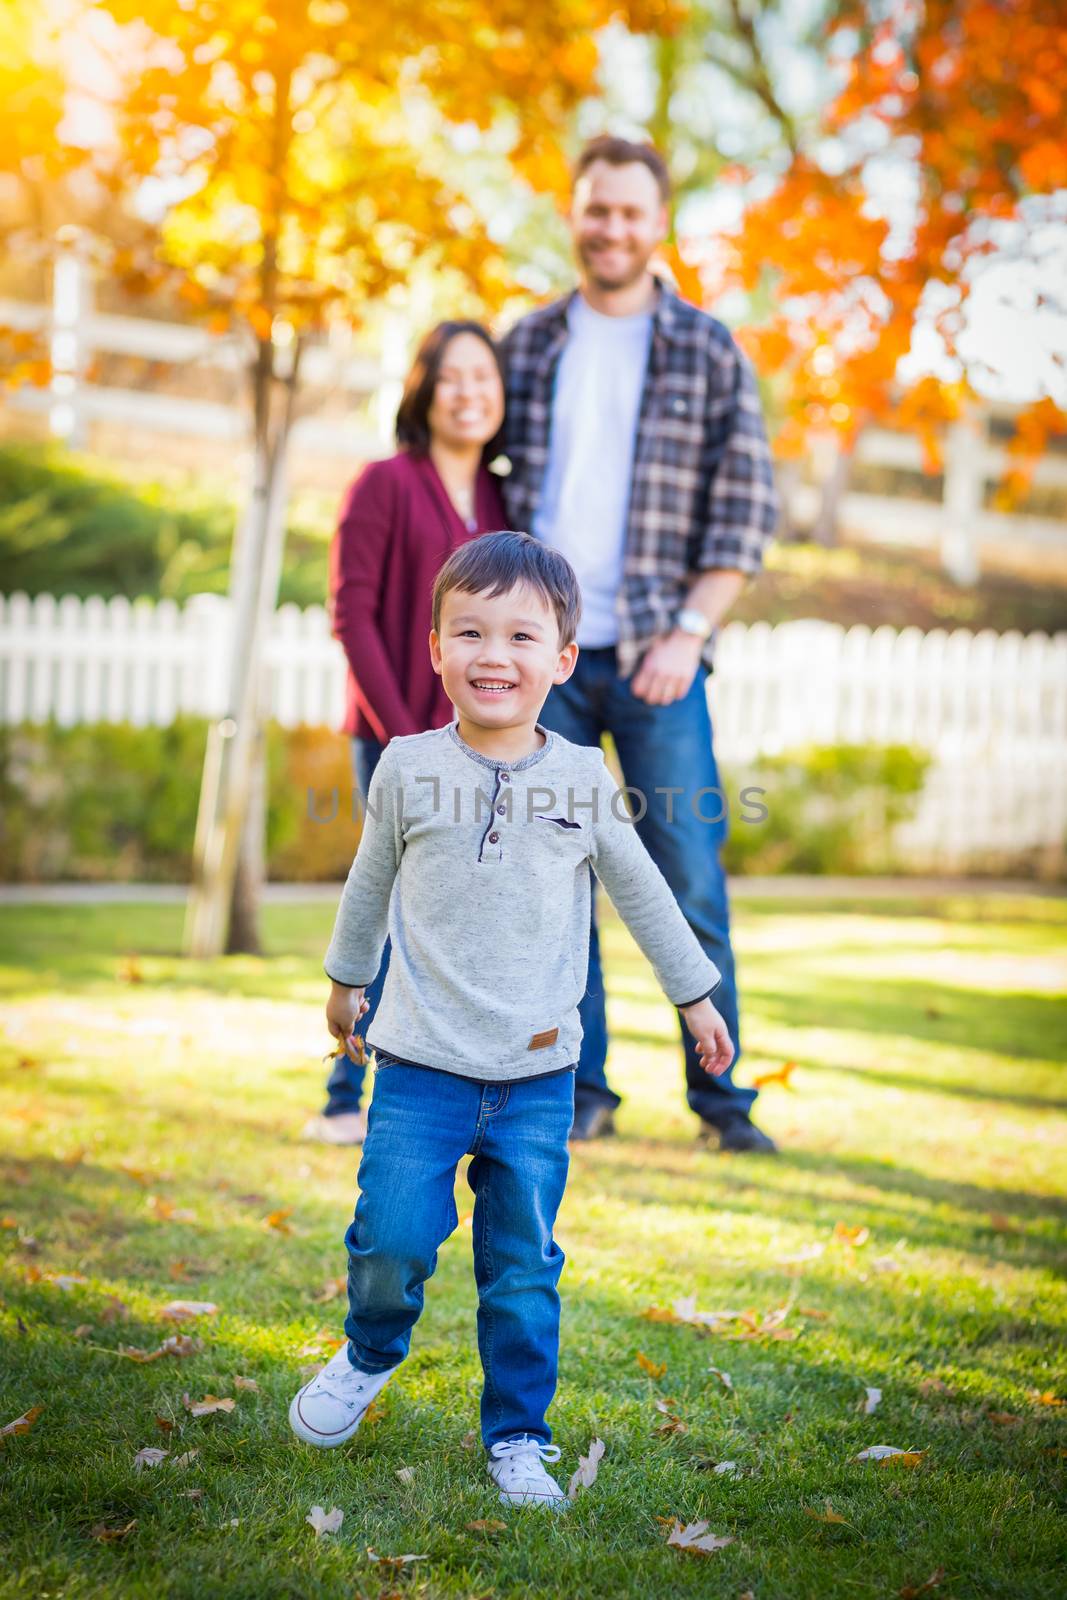 Outdoor Portrait of Happy Mixed Race Chinese and Caucasian Parents and Child.